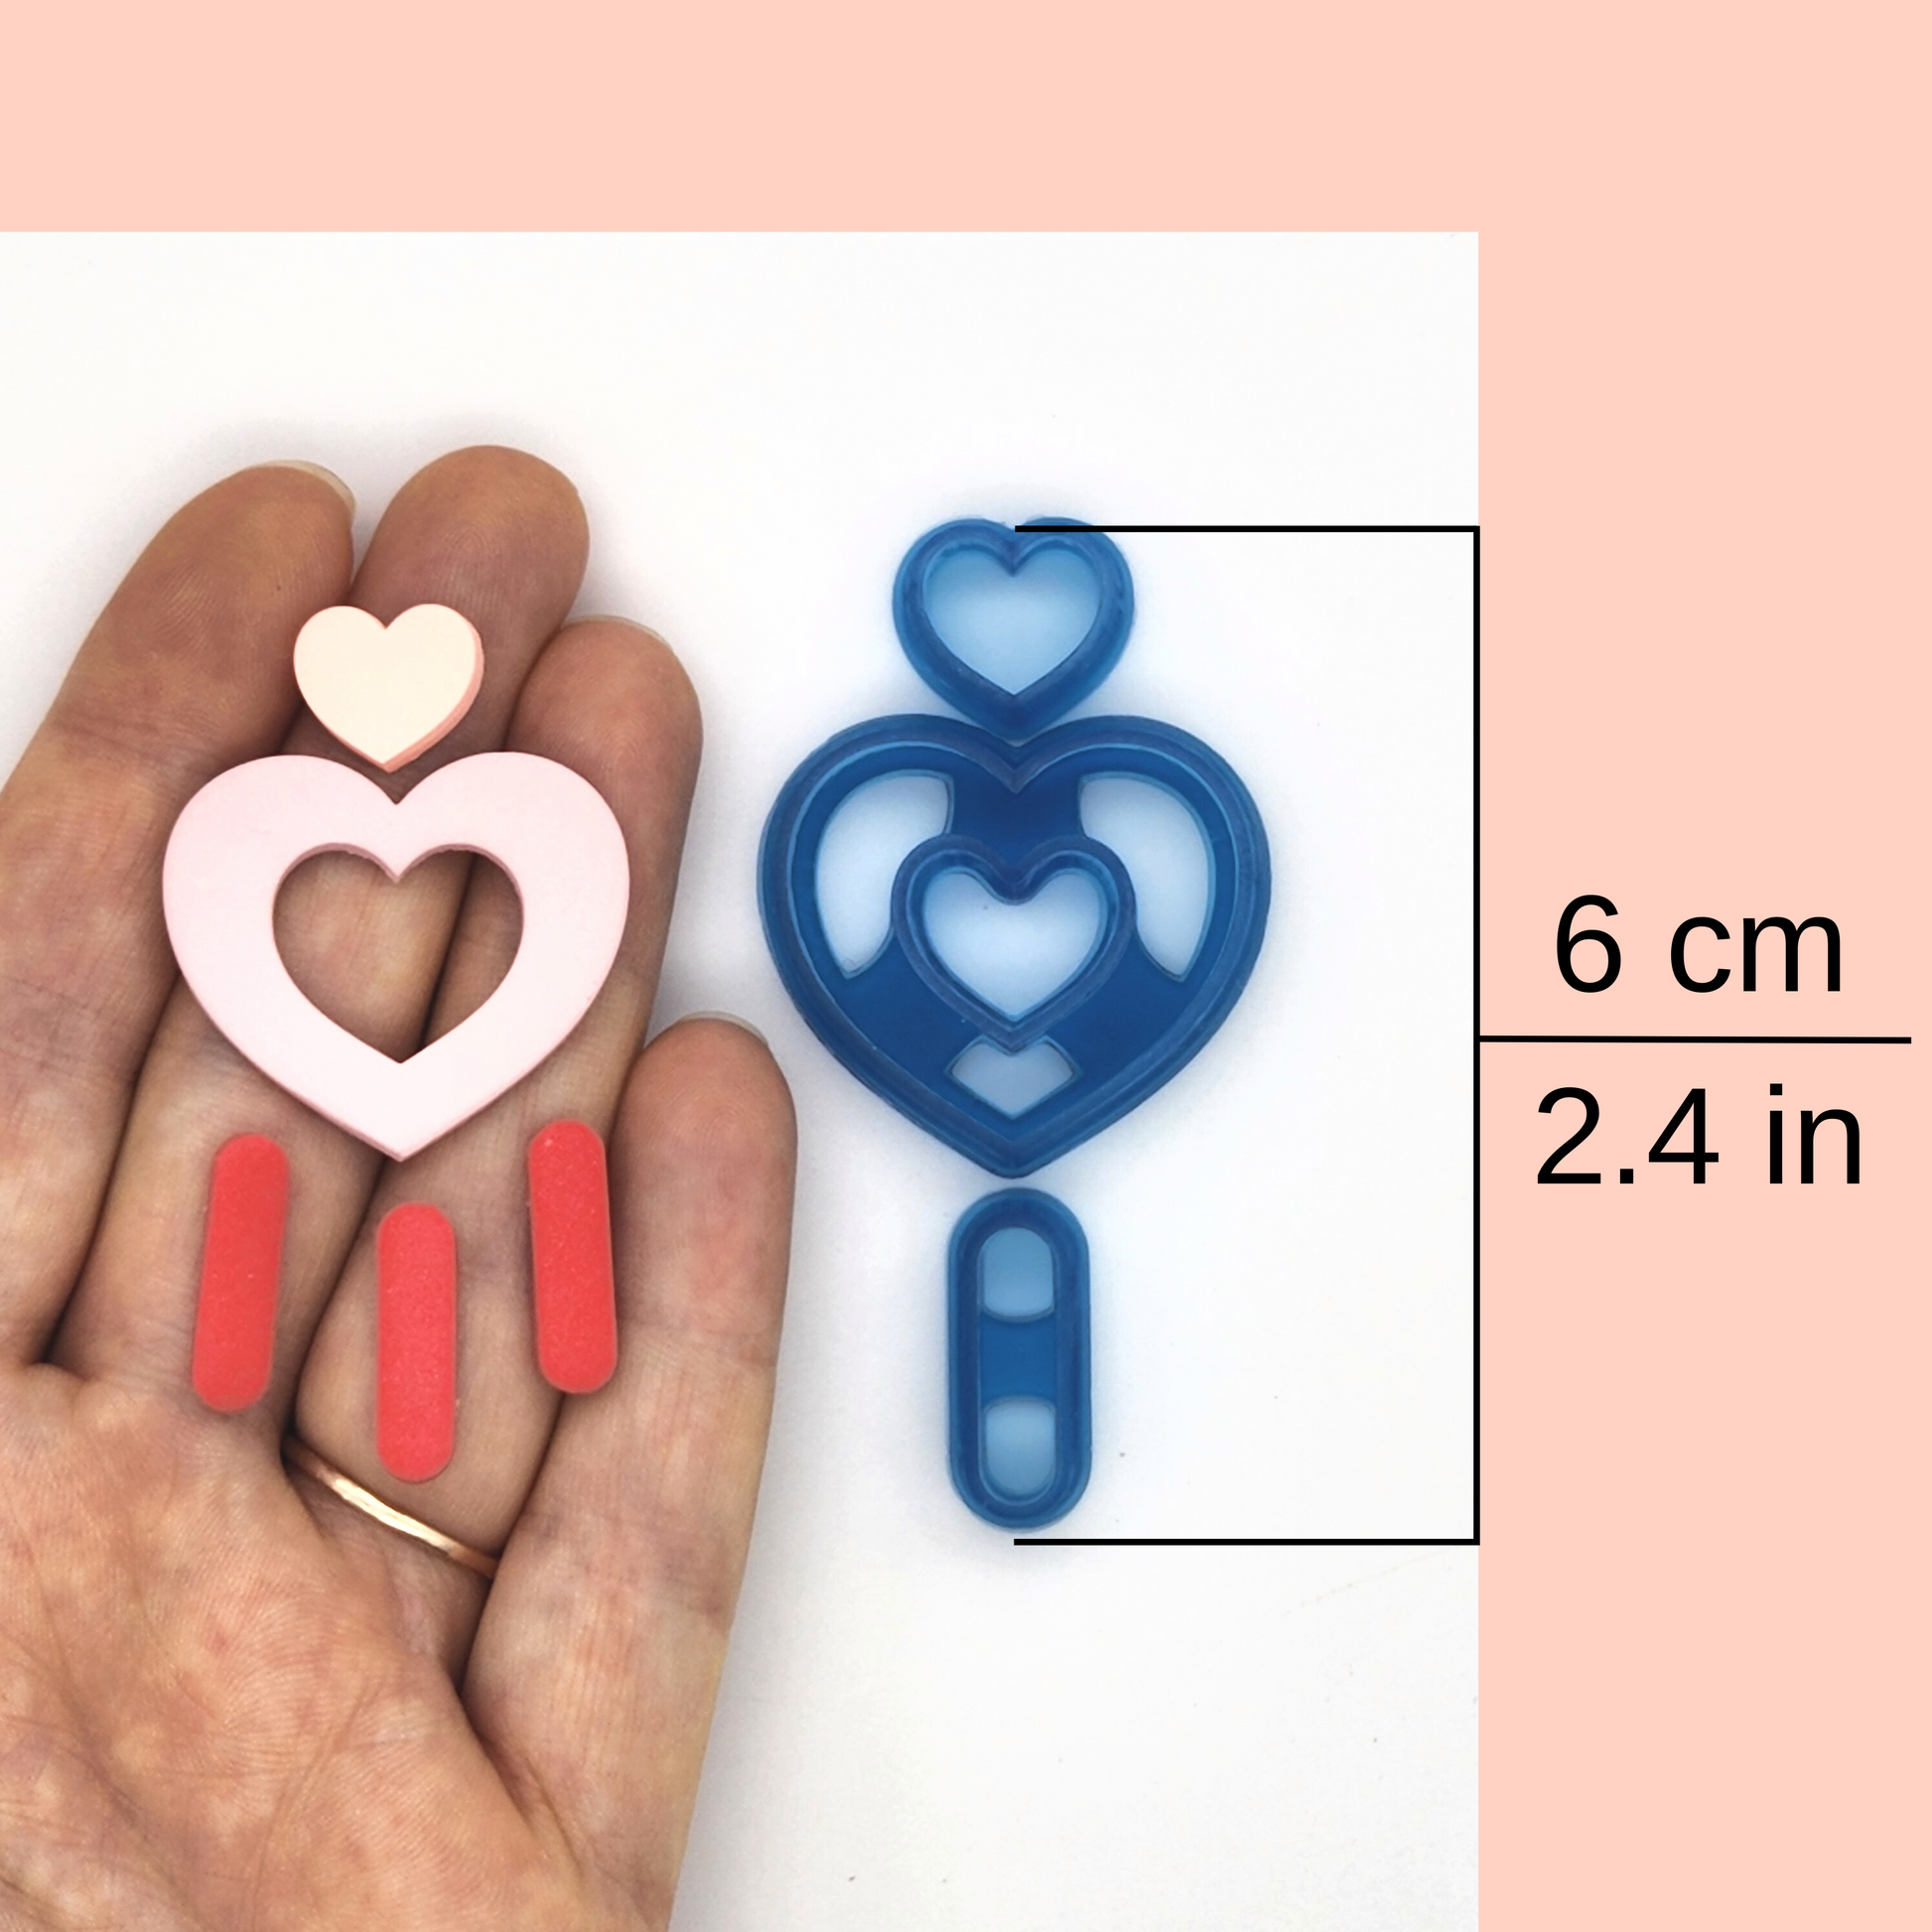 Chelsea heart dangle set clay cutter comparison with sample finish product. Chelsea heart dangle set clay cutter size, 6cm/2.4in